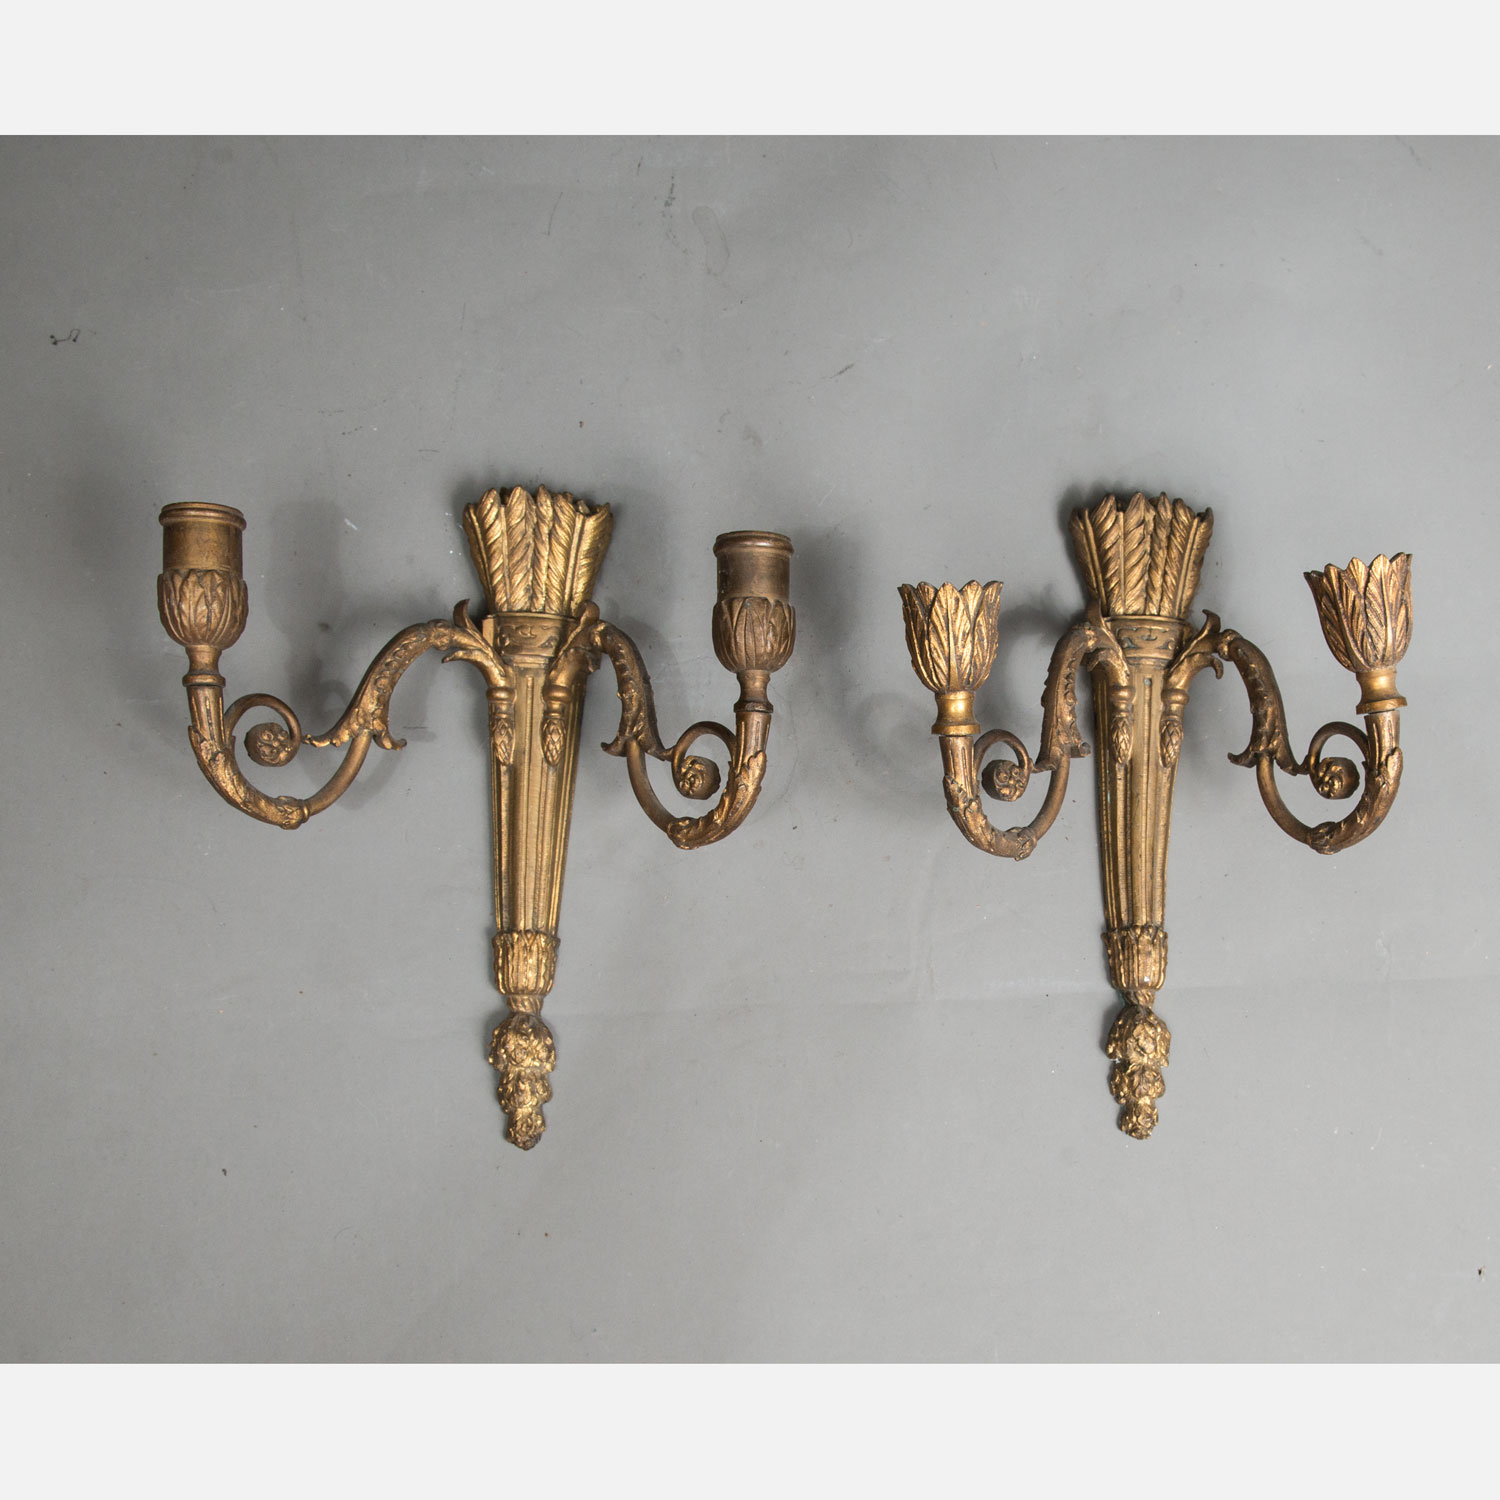 Pair of French Wall Apliques - Image 2 of 4